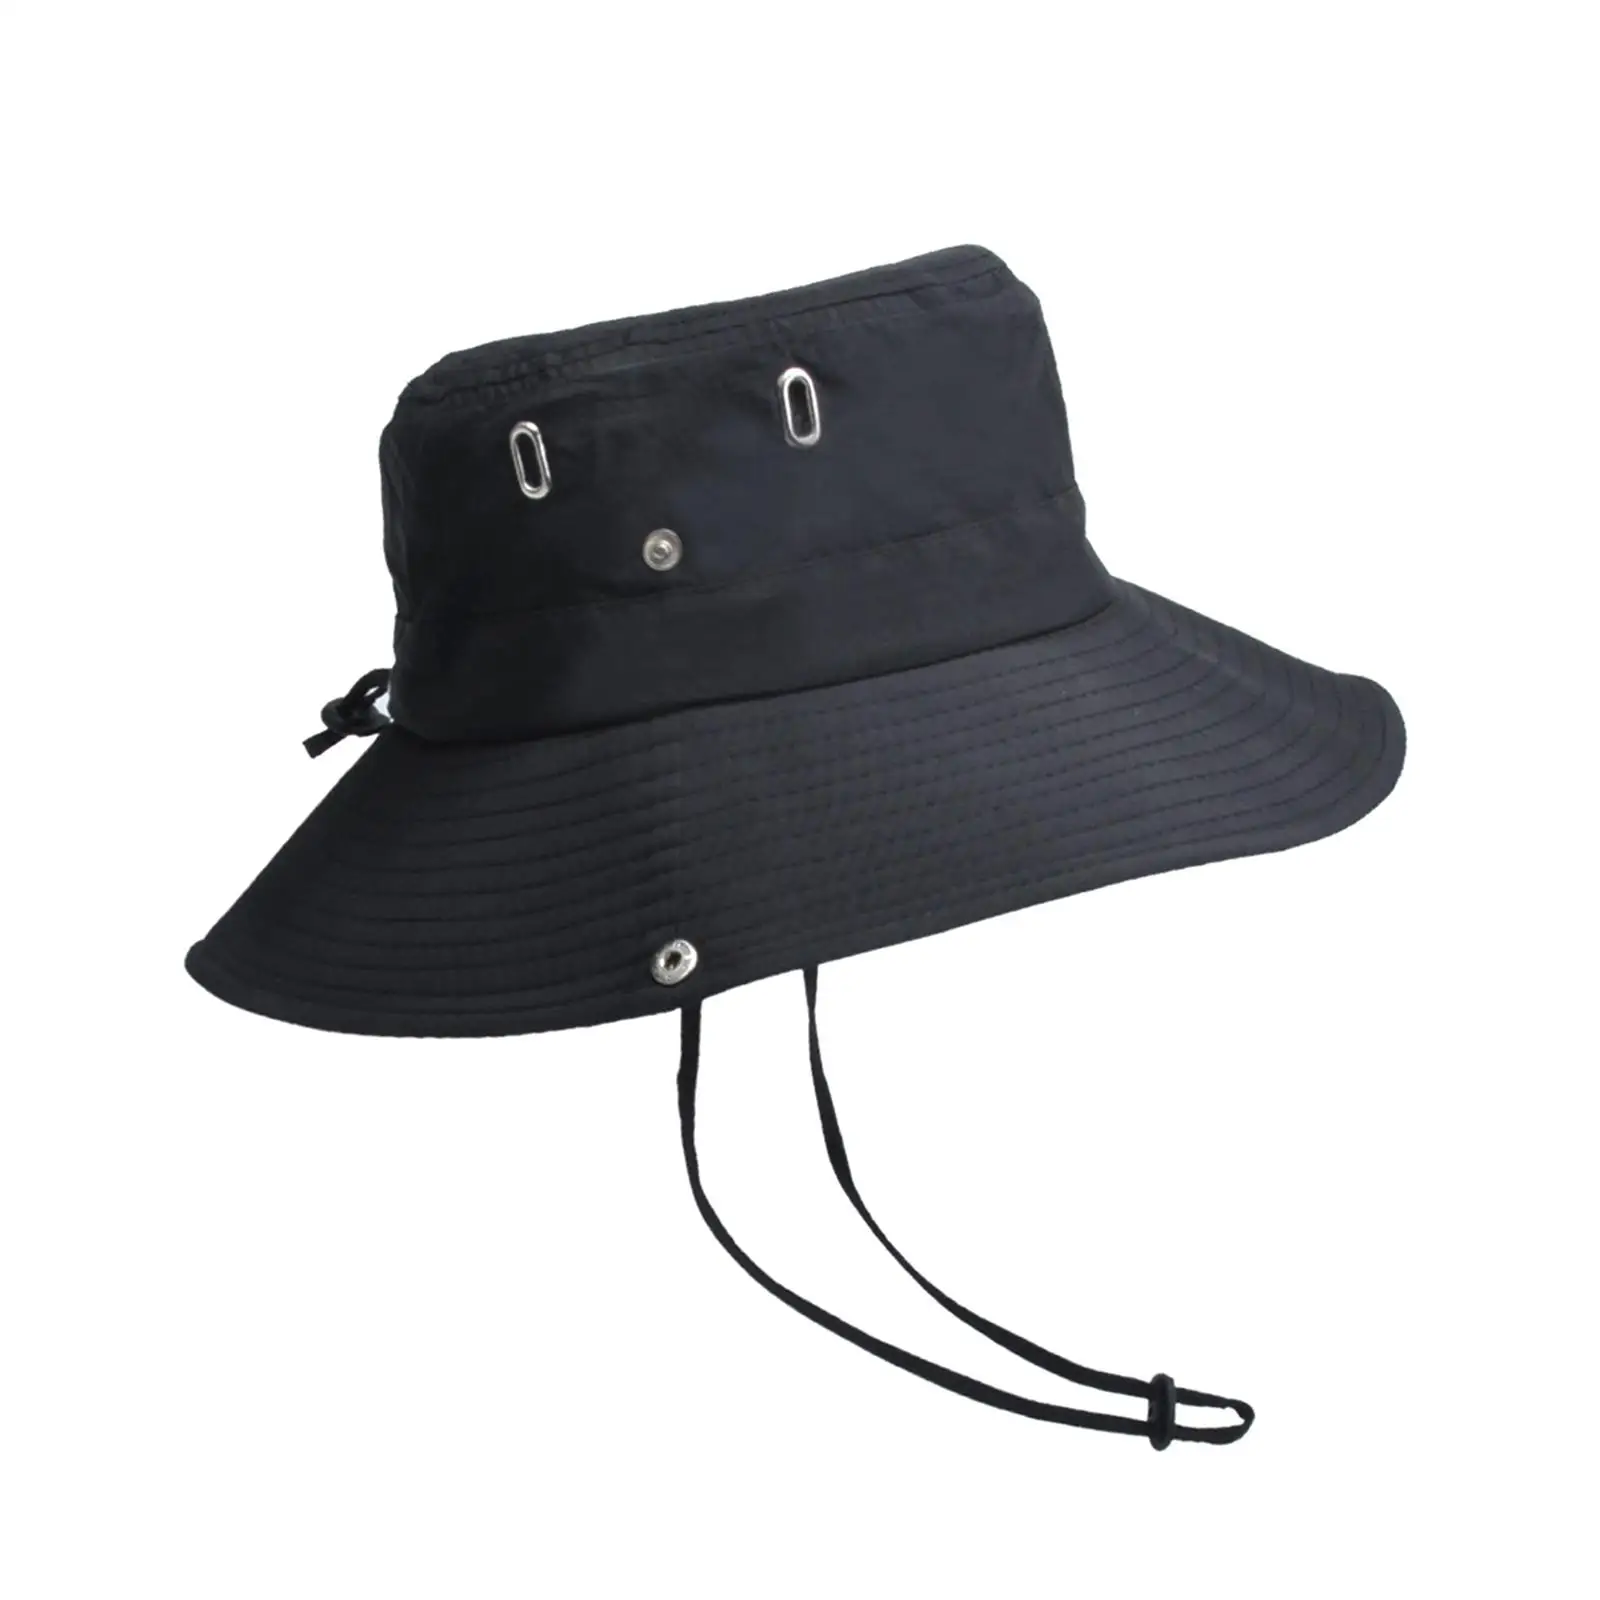 Bucket Hat Wide Brim Polyester Fashion Sun Hats for Camping Travel Outdoor Fishing